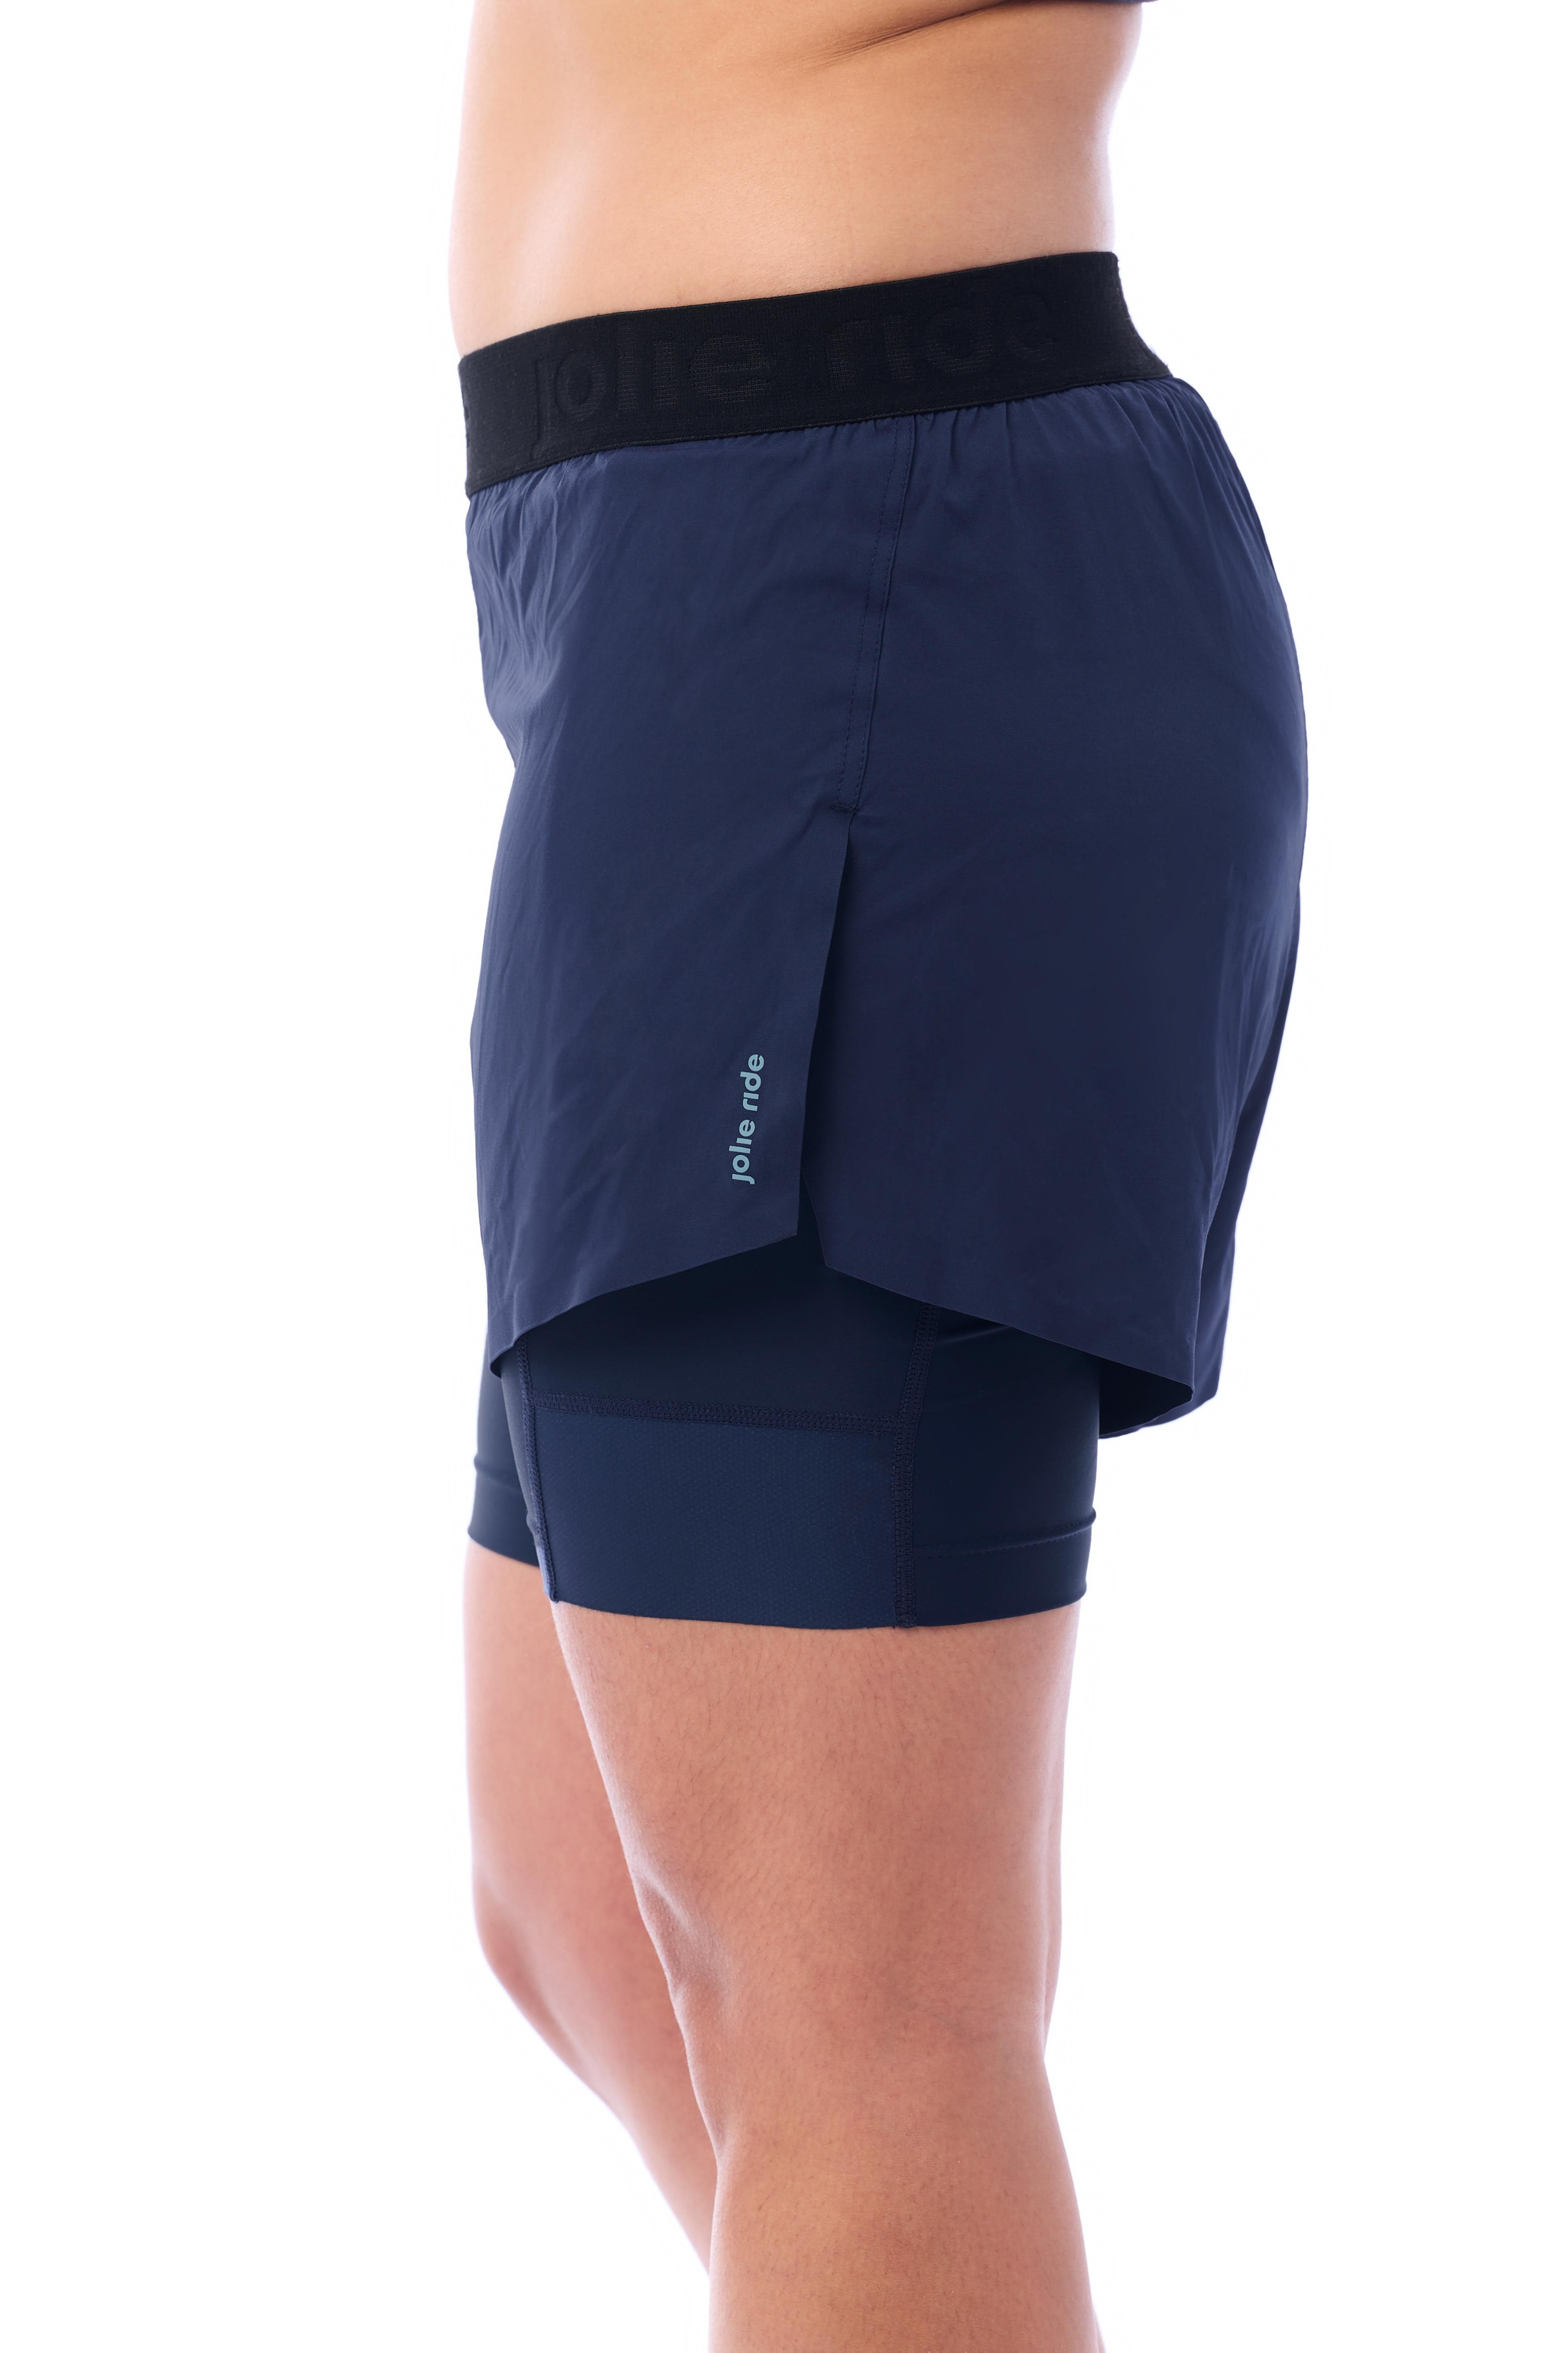 JolieRide Cycling shorts cycling shorts with over-shorts and 50+ UV protection